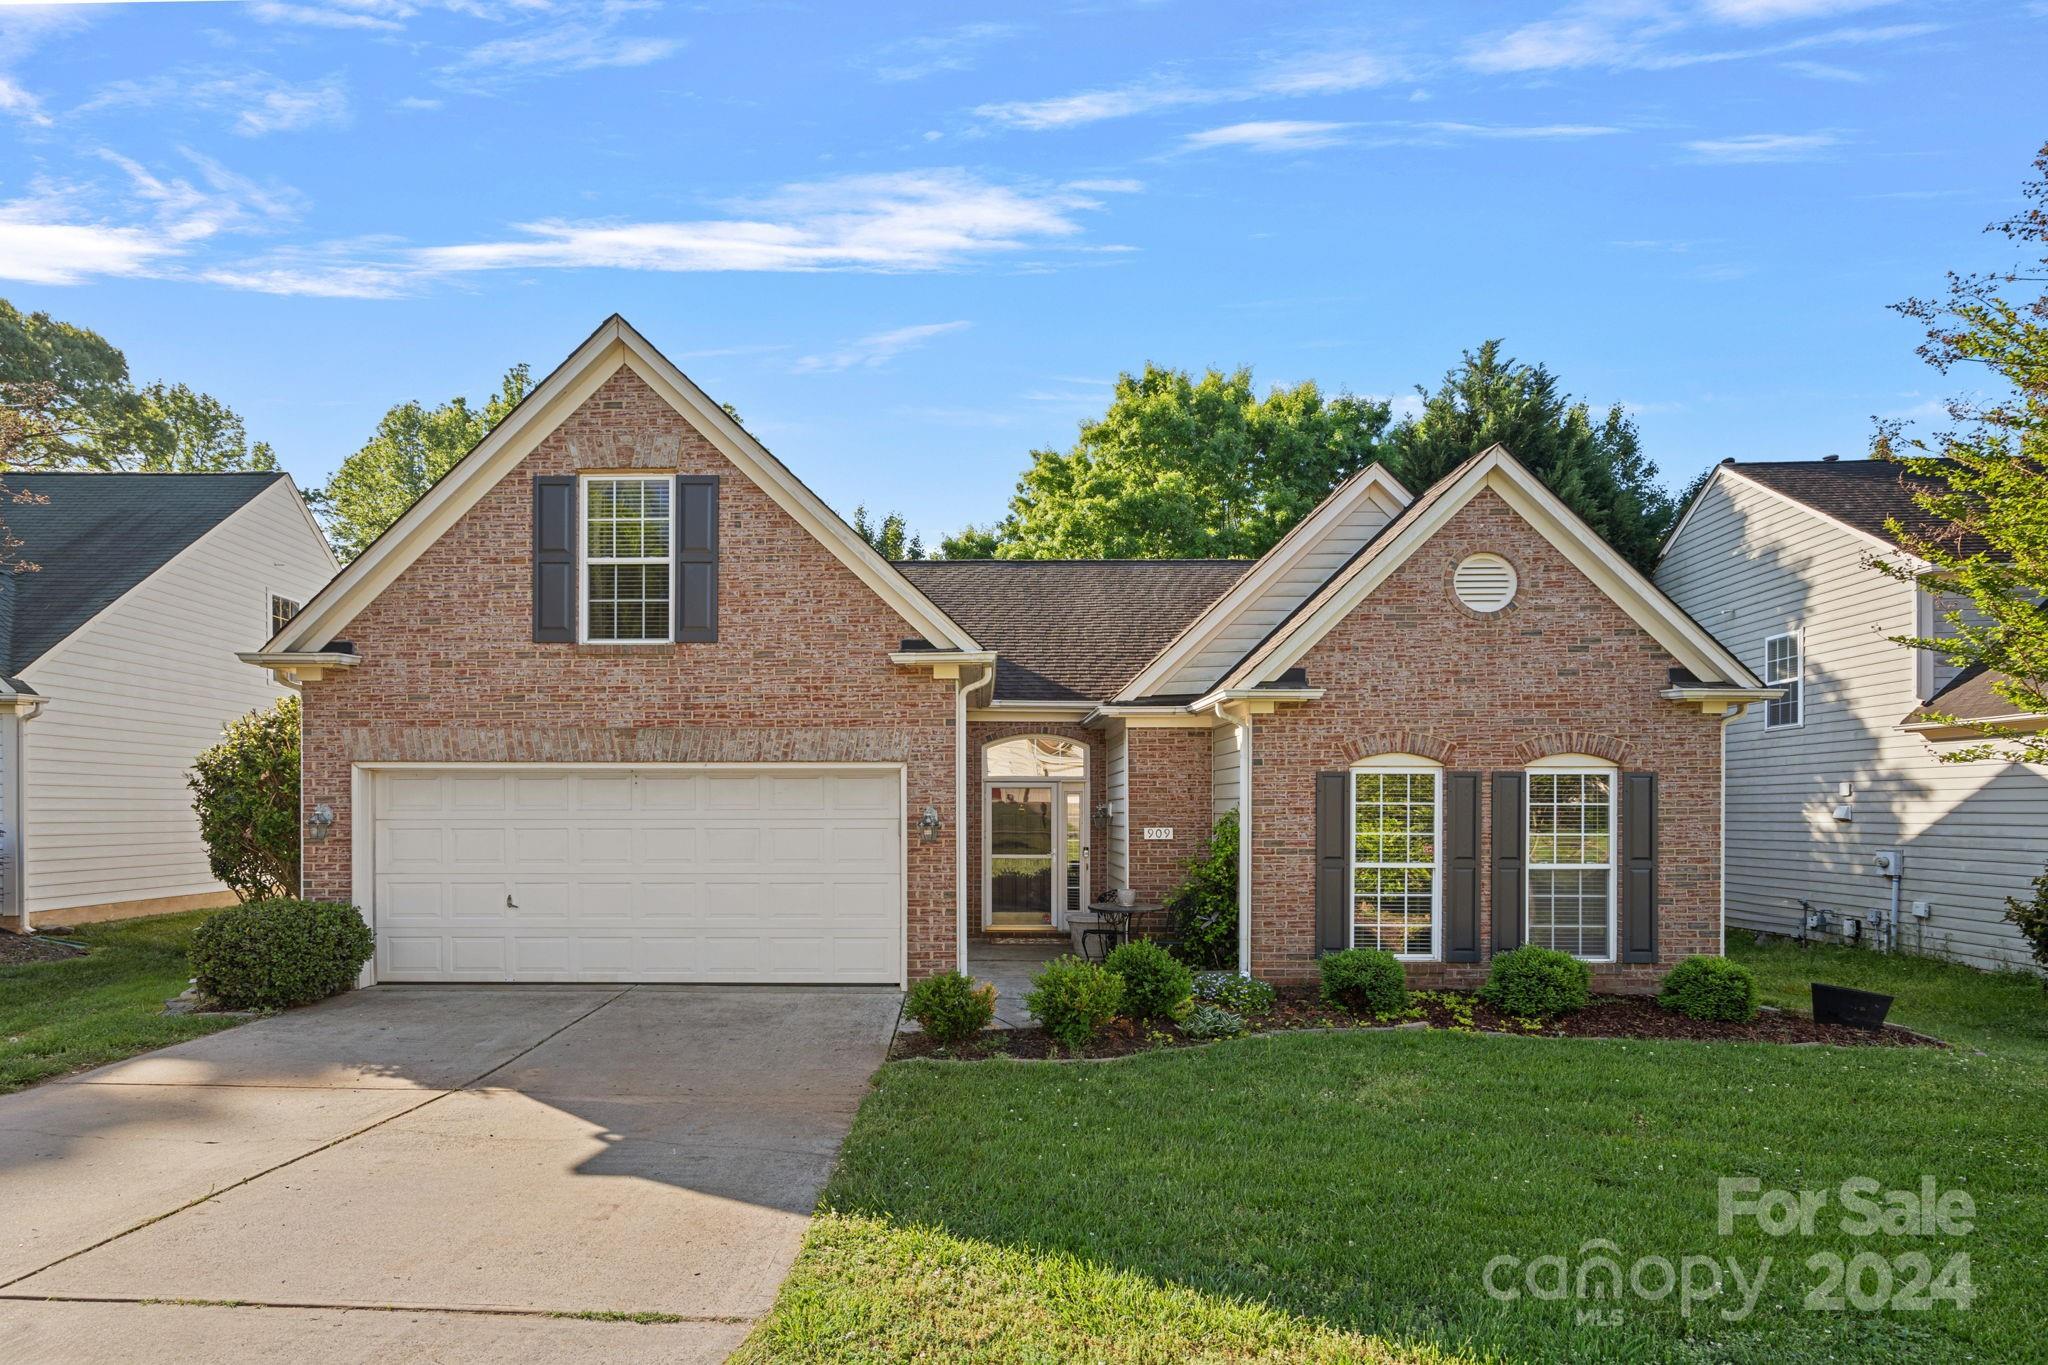 Photo one of 909 Clearbrook Rd Matthews NC 28105 | MLS 4131028